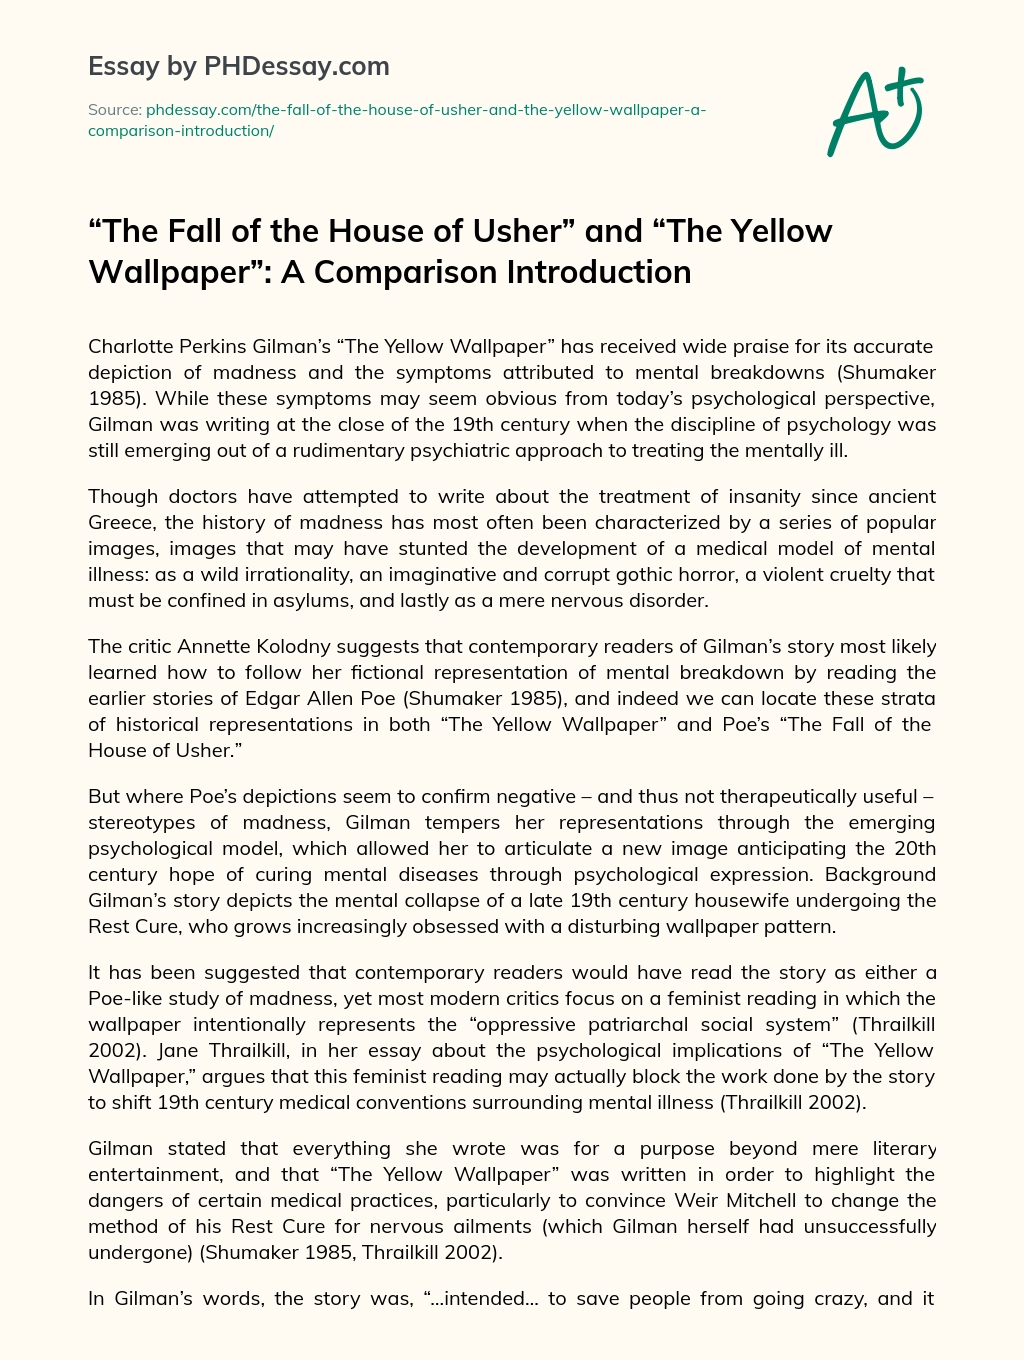 The Fall of the House of Usher and The Yellow Wallpaper: A Comparison Introduction essay